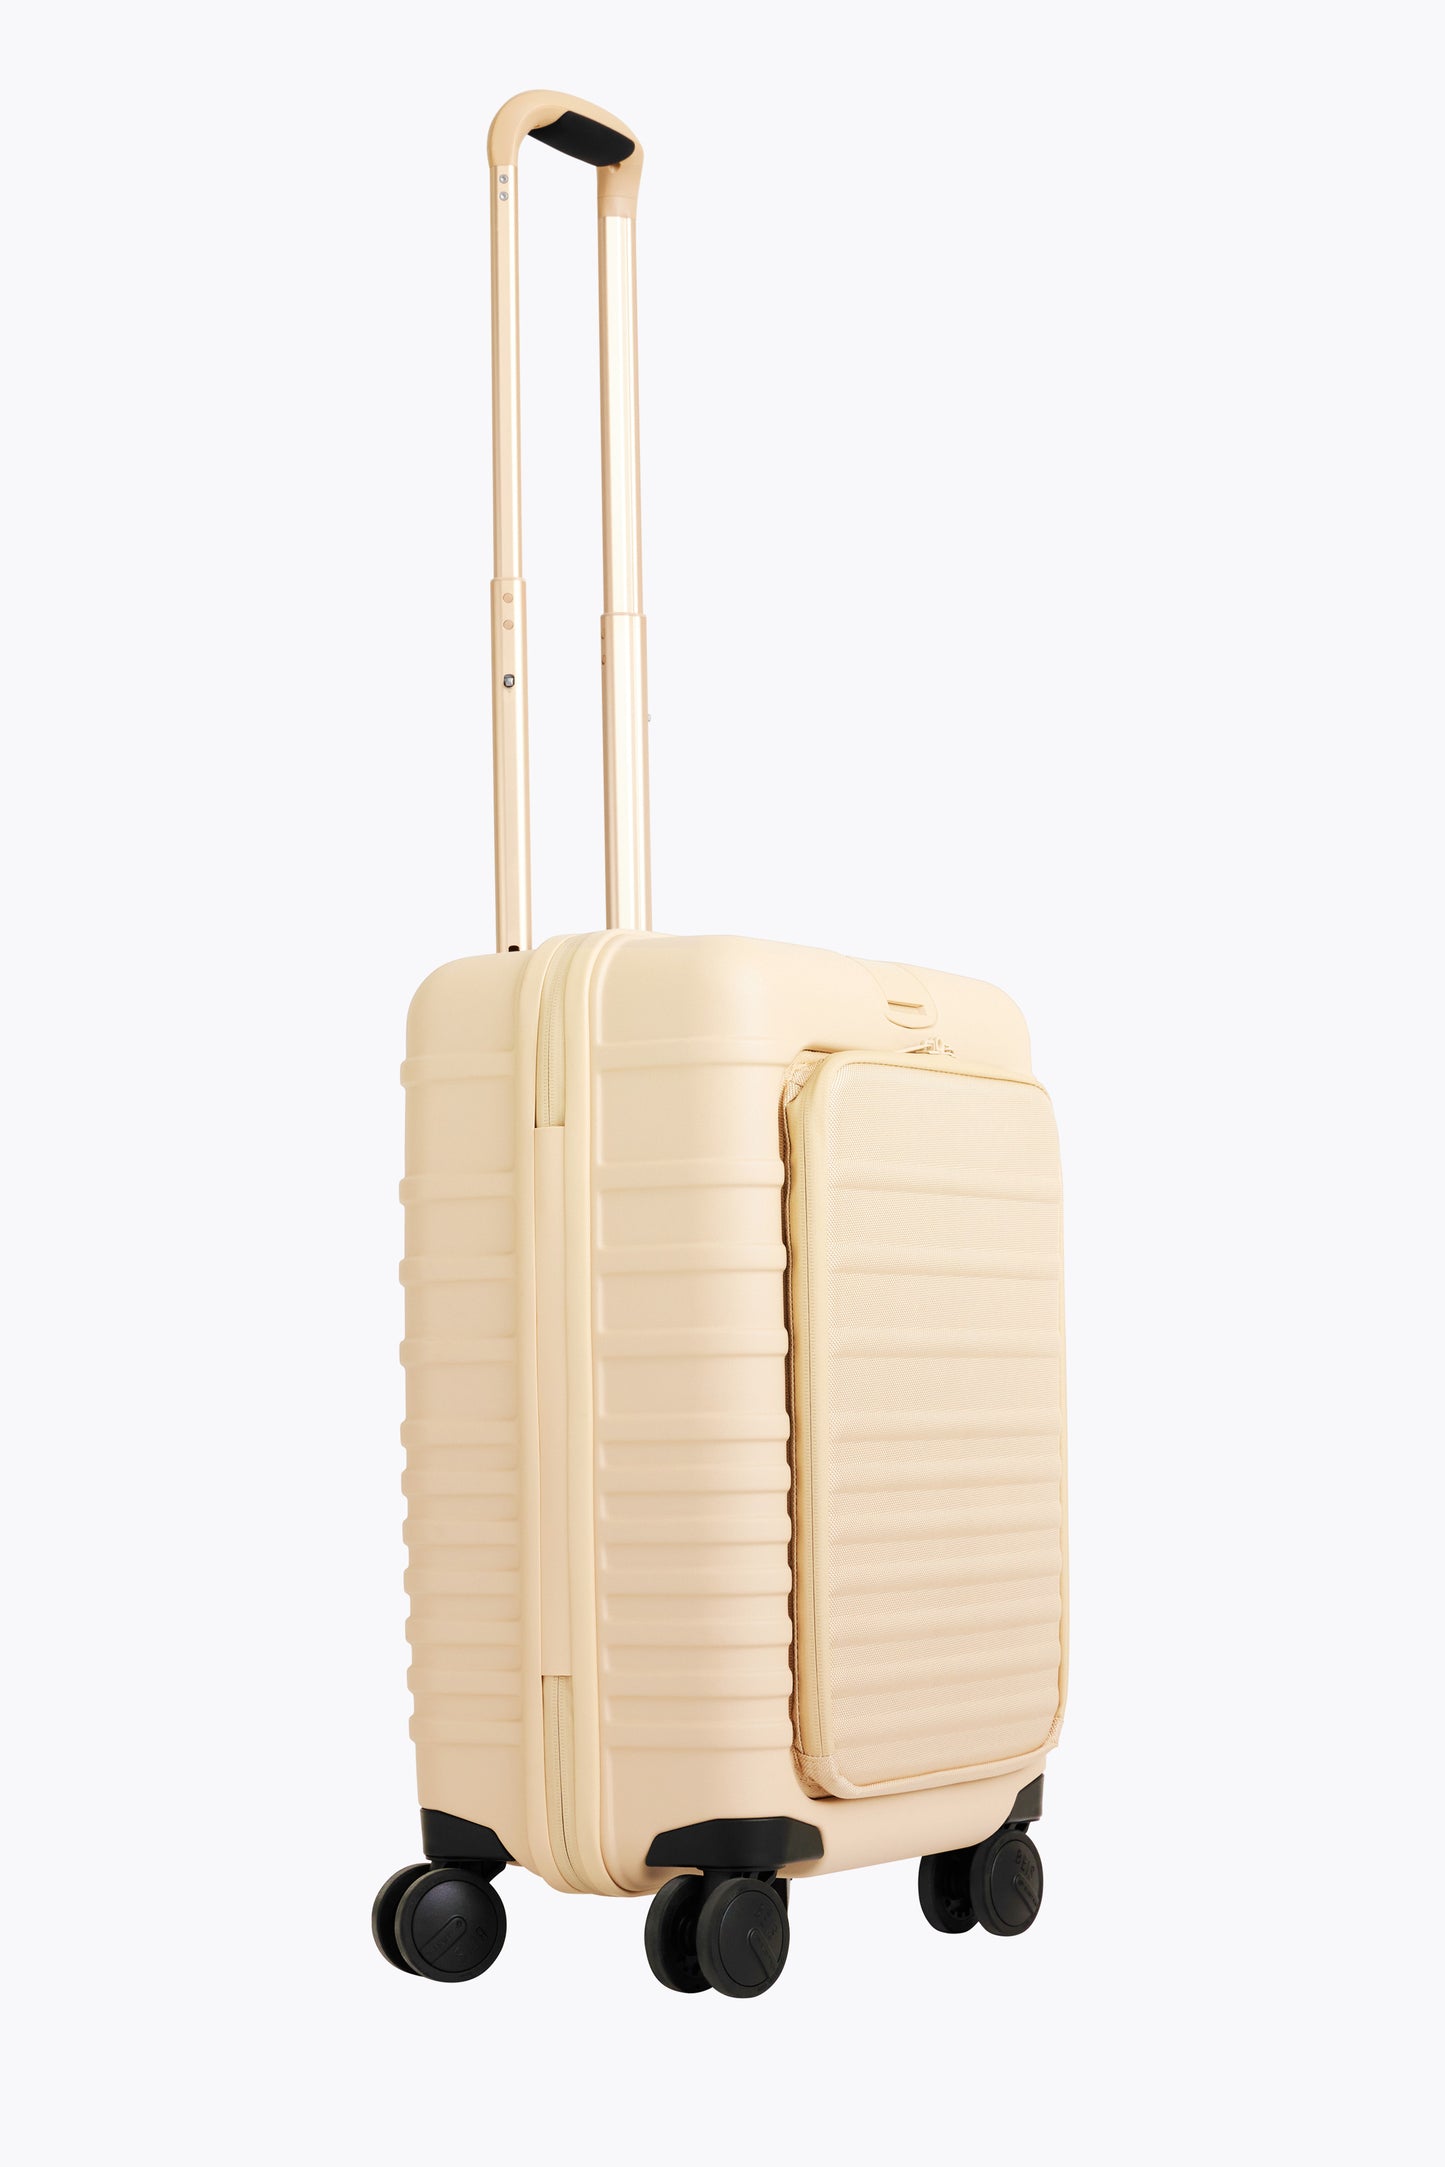 BÉIS 'The Front Pocket Carry-On' In Beige - Beige Carry-On Luggage With  Front Pocket